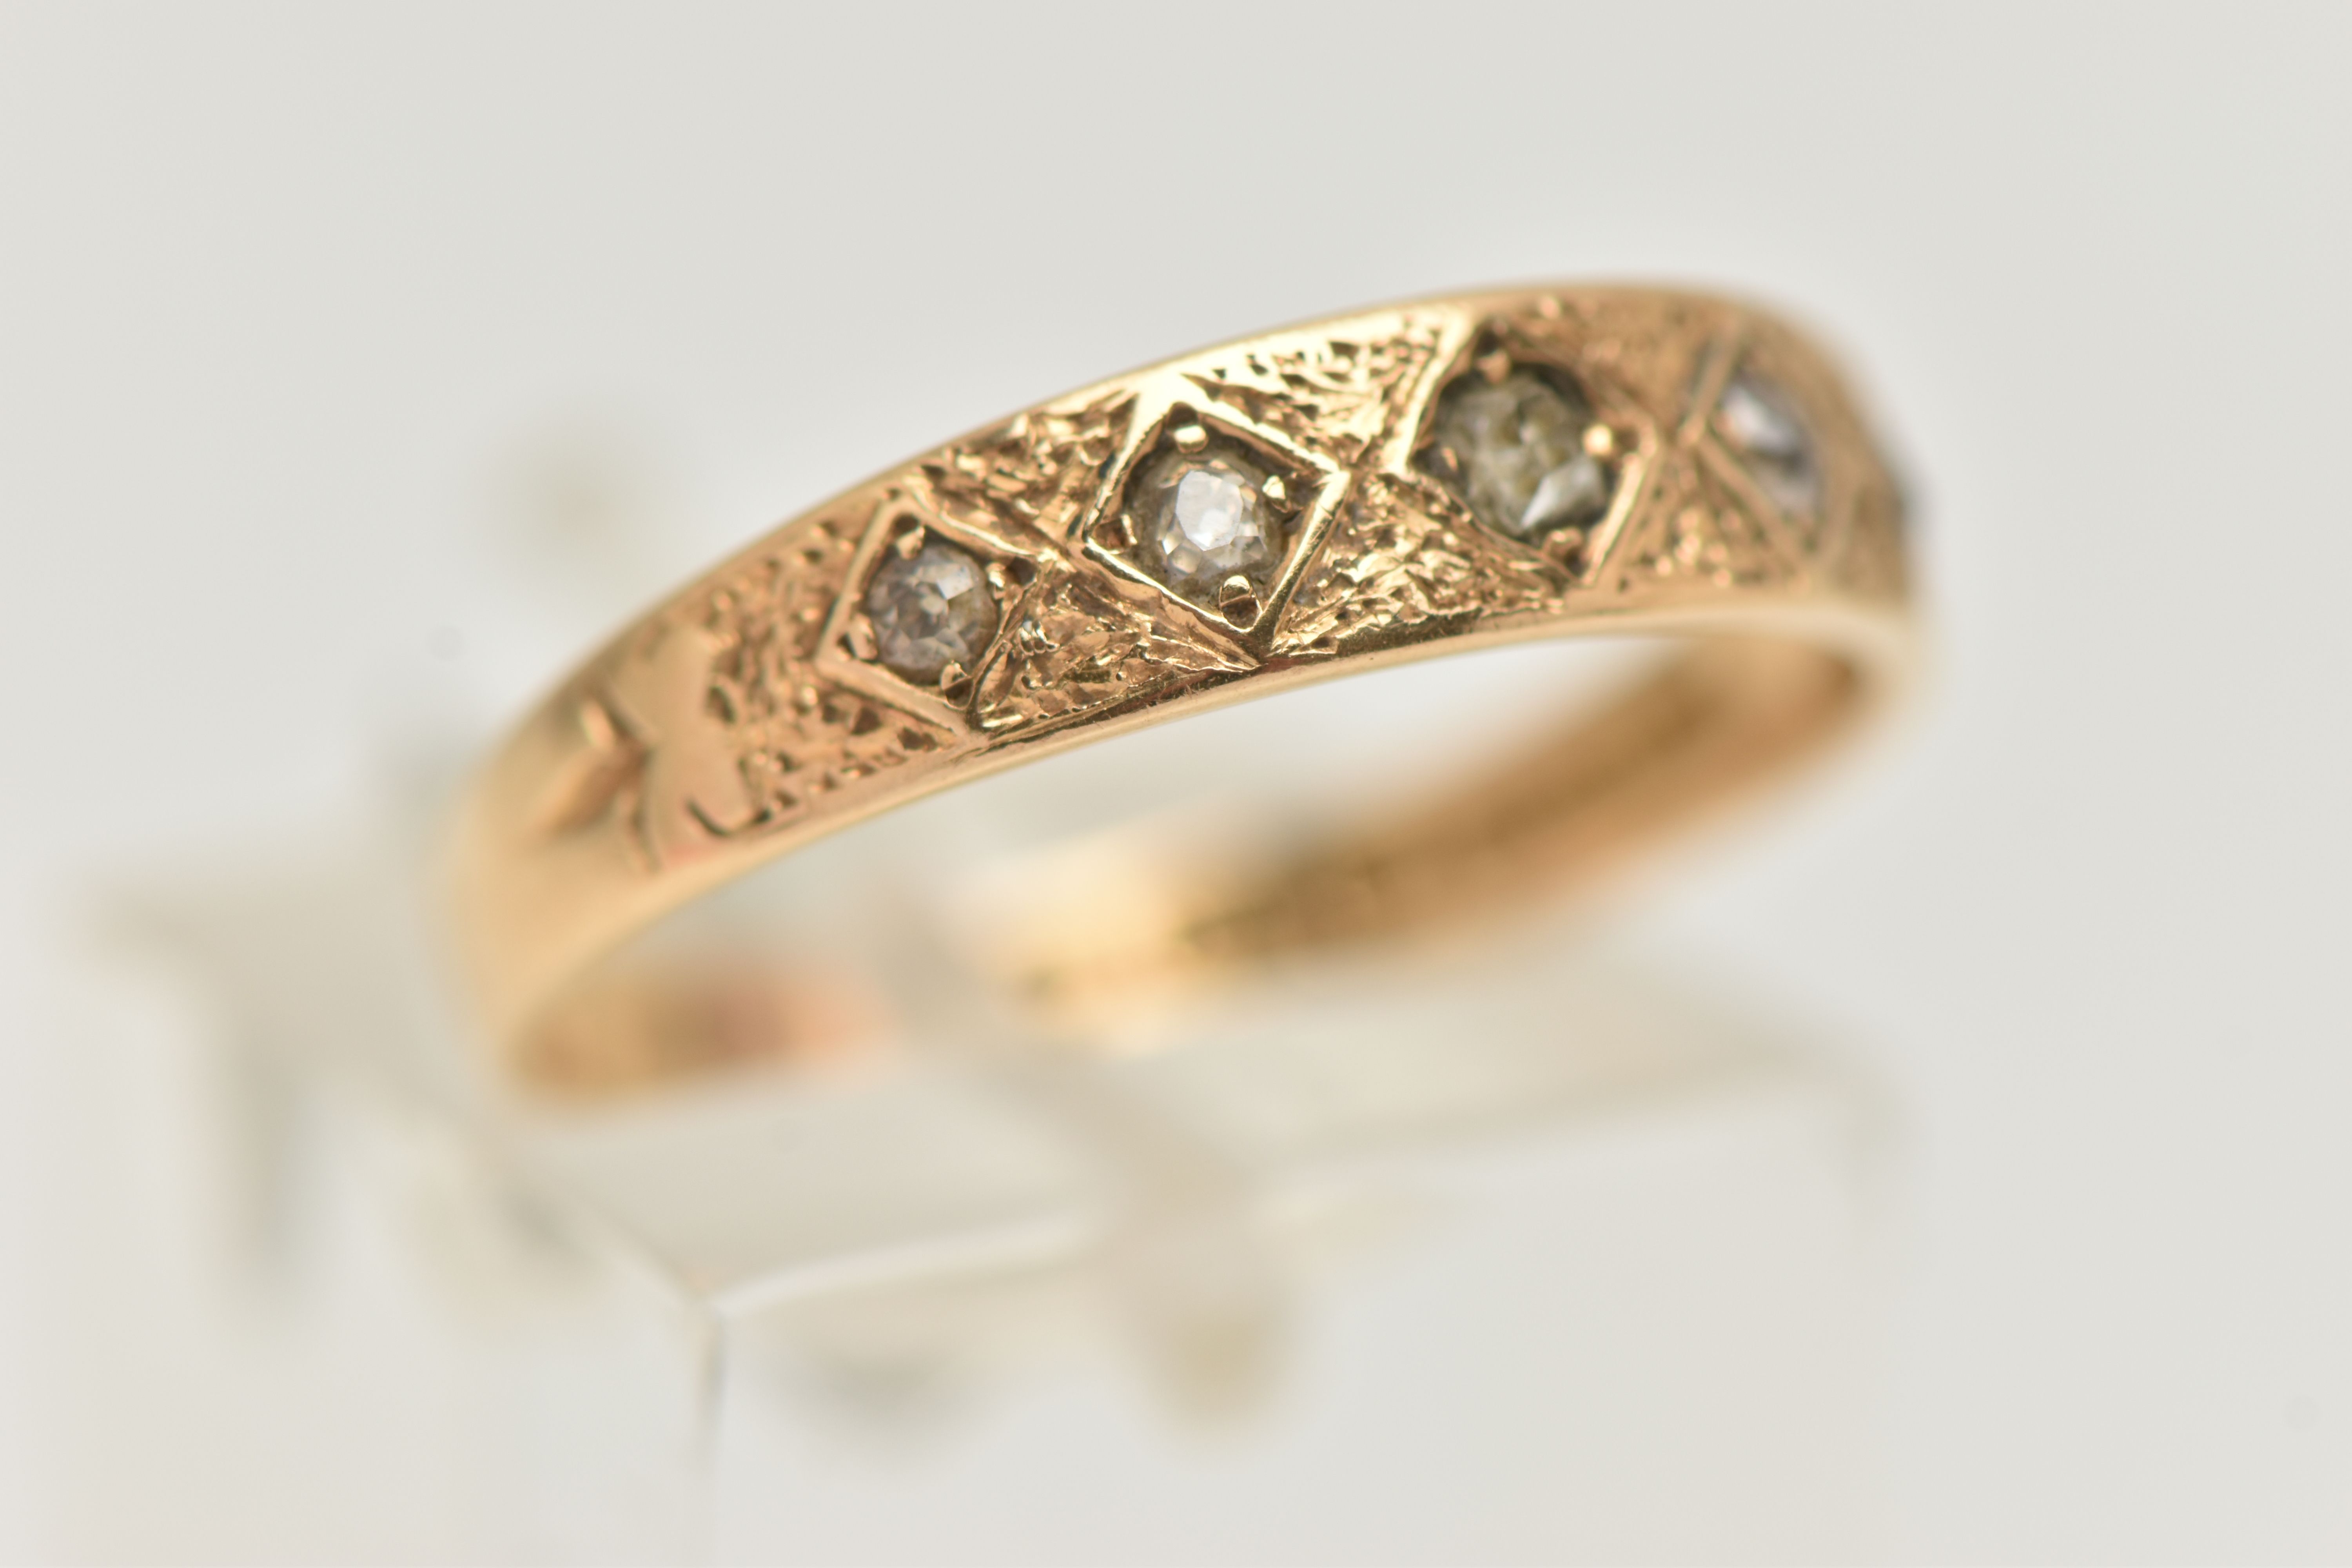 AN 18CT DIAMOND FIVE STONE RING, set with graduating single/old cut diamonds, claw set in a - Image 4 of 4